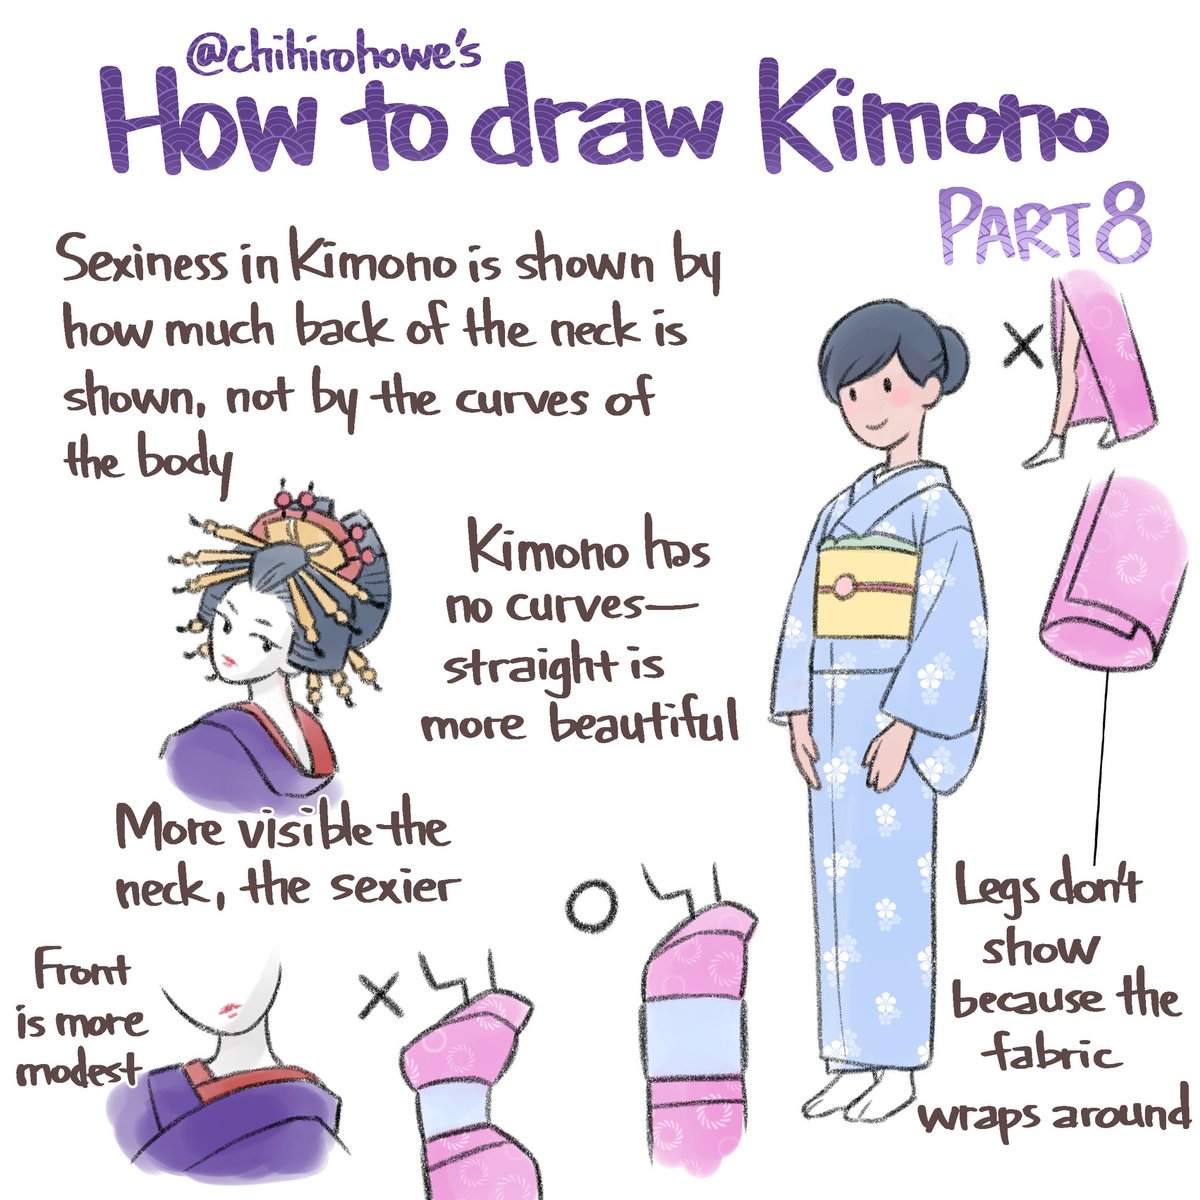  #kimono Part 8: Beauty in the shapeThis is part of the reason why we were so angry with Kim Kardashian’s attempted “kimono”The beauty of kimono is about straight lines, not curves of the body.